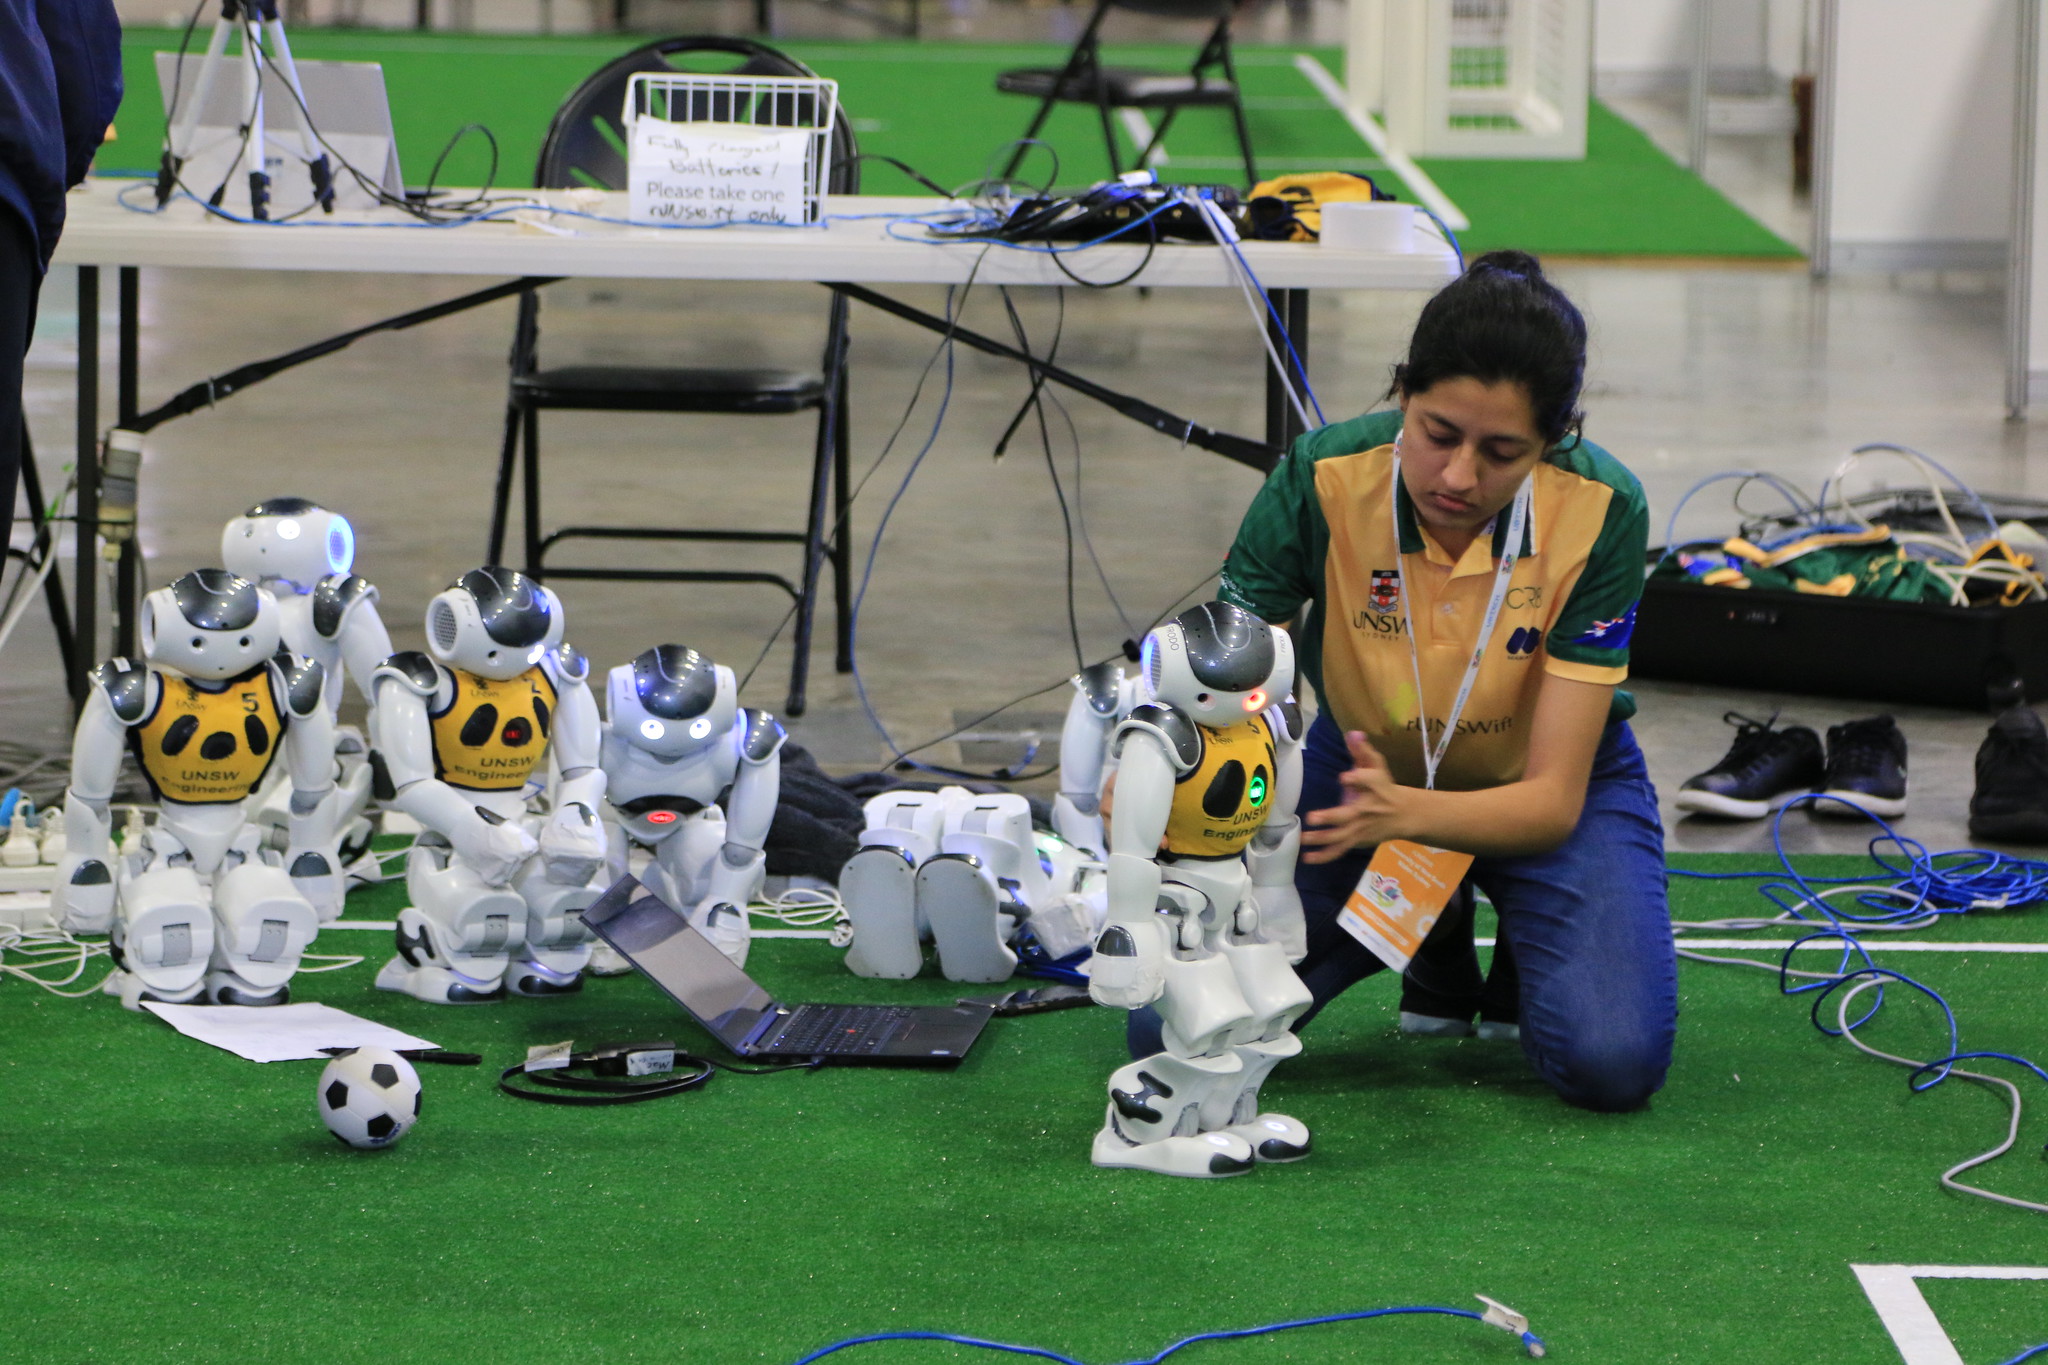 A UNSW team member sets the robots up for competition